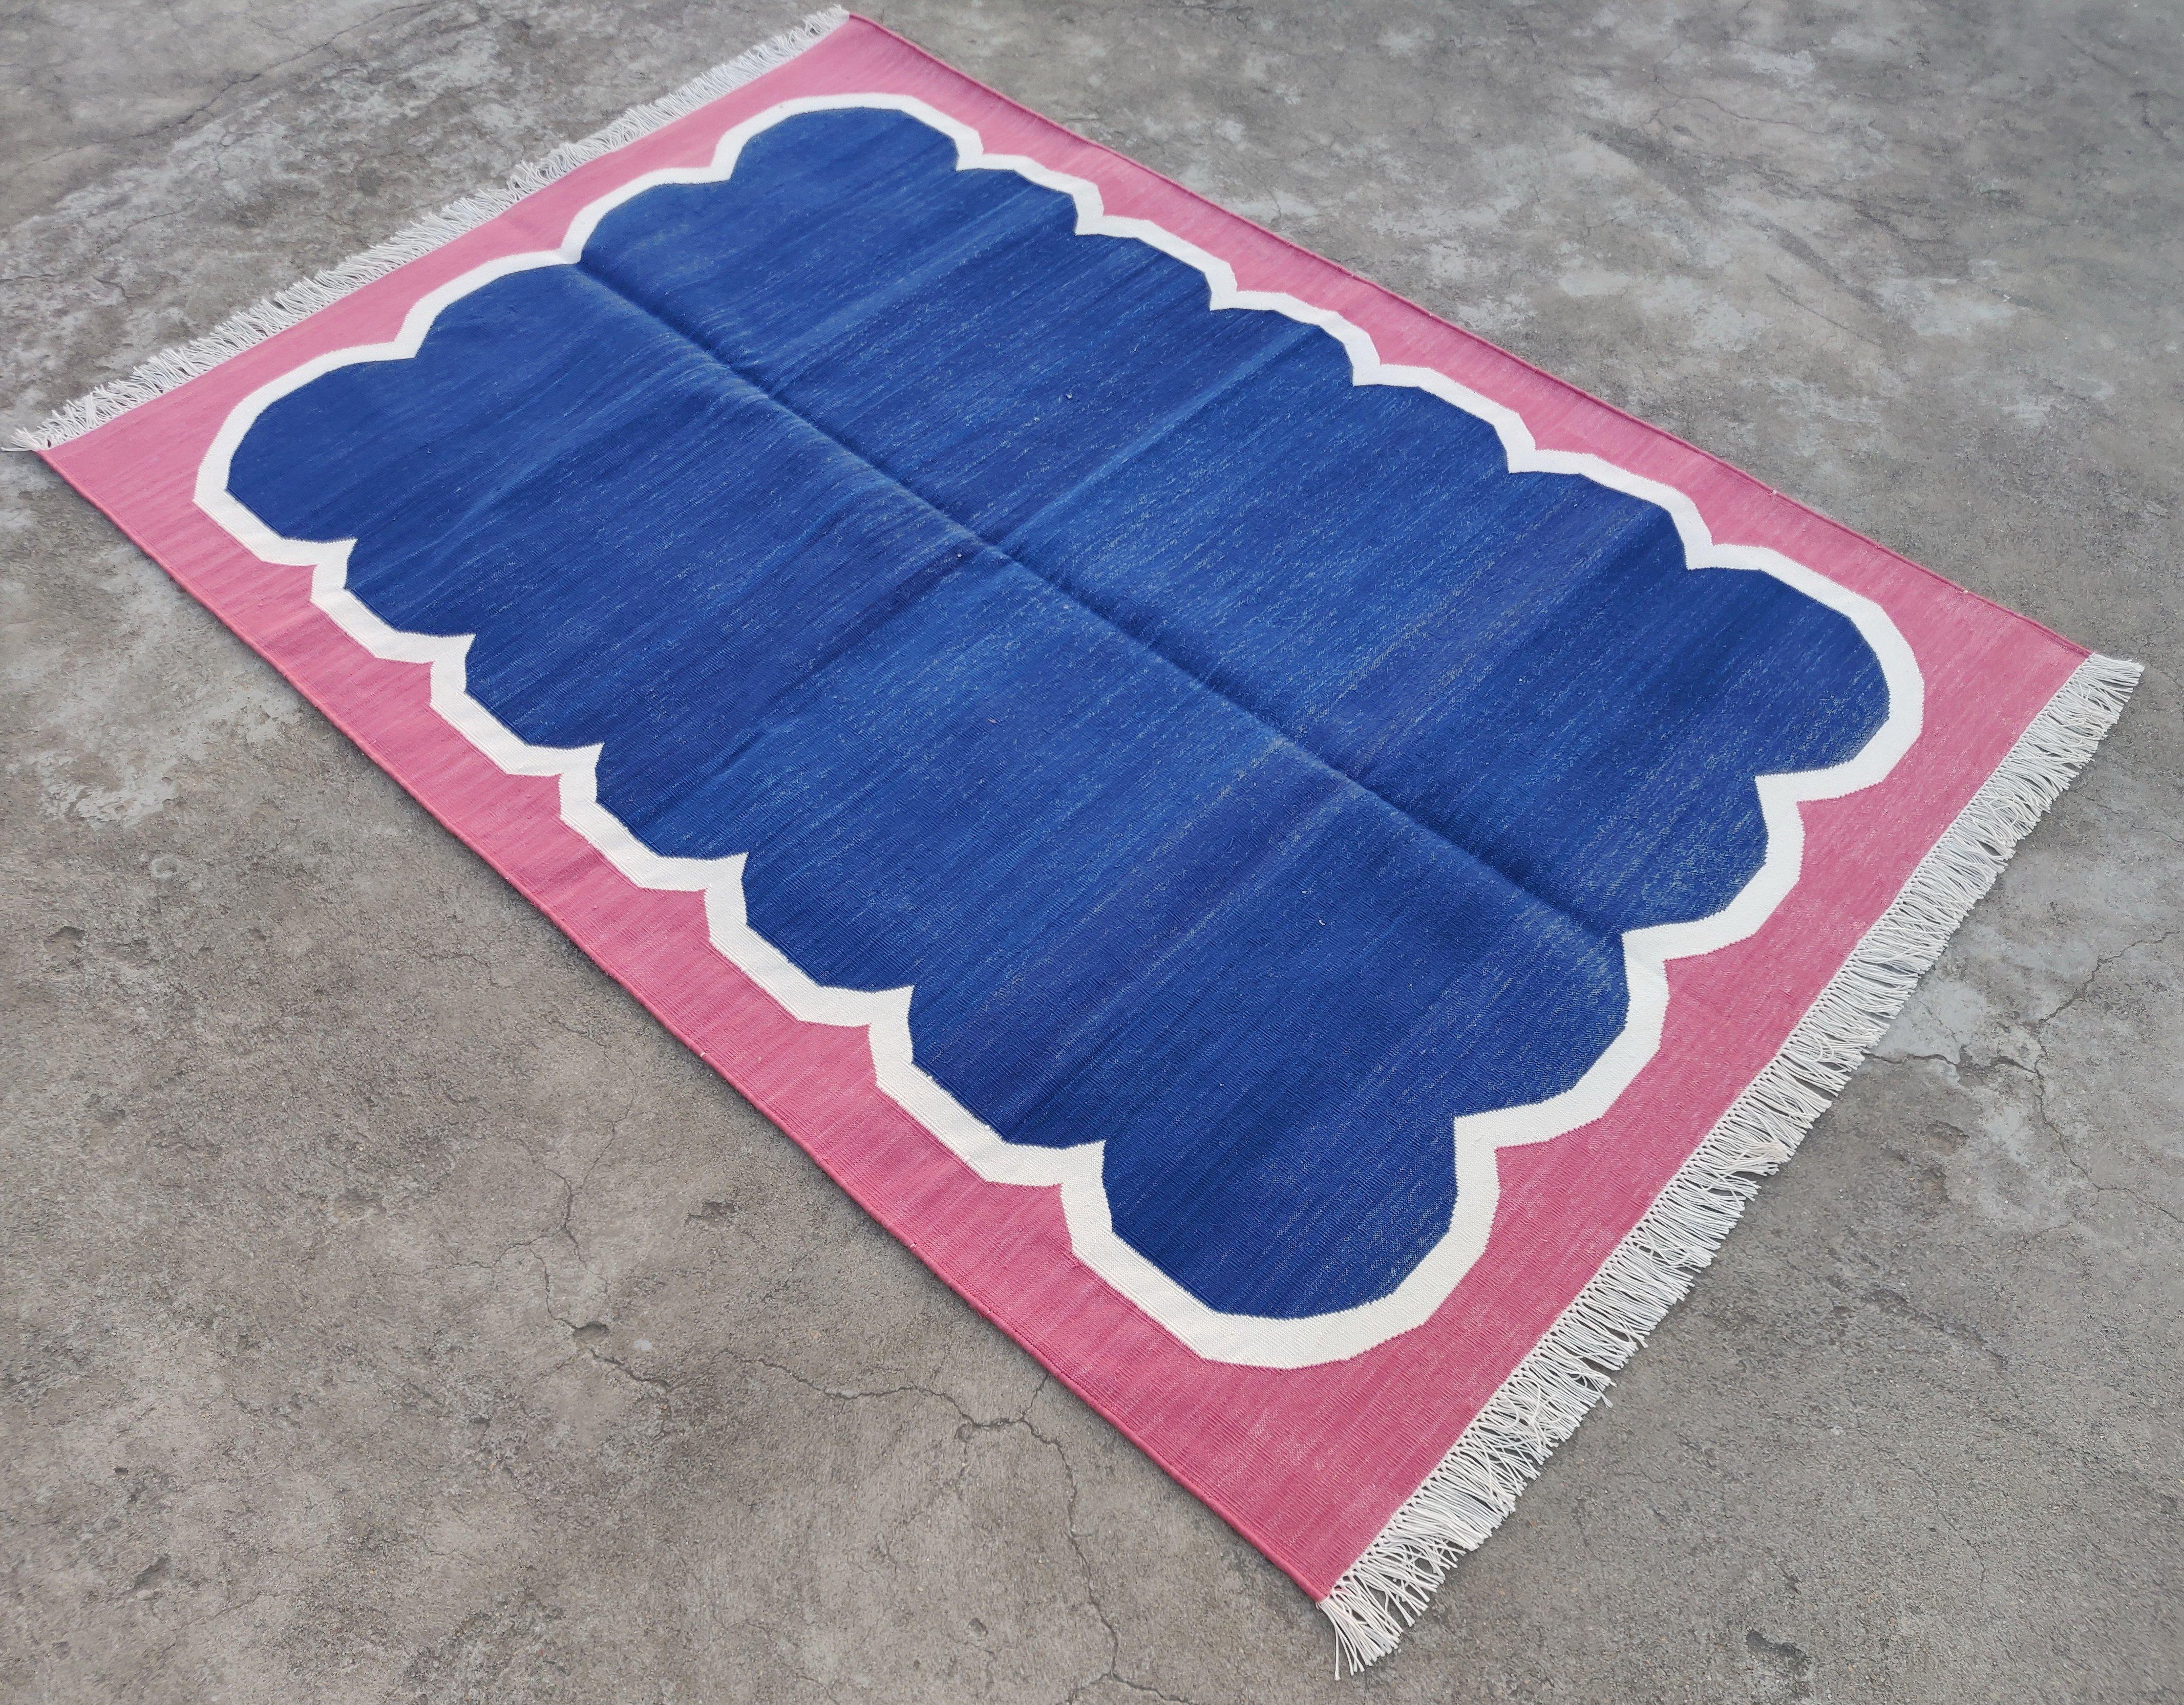 Cotton Vegetable Dyed Navy Blue And Raspberry Pink Scalloped Striped Indian Dhurrie Rug-4'x6' 
These special flat-weave dhurries are hand-woven with 15 ply 100% cotton yarn. Due to the special manufacturing techniques used to create our rugs, the